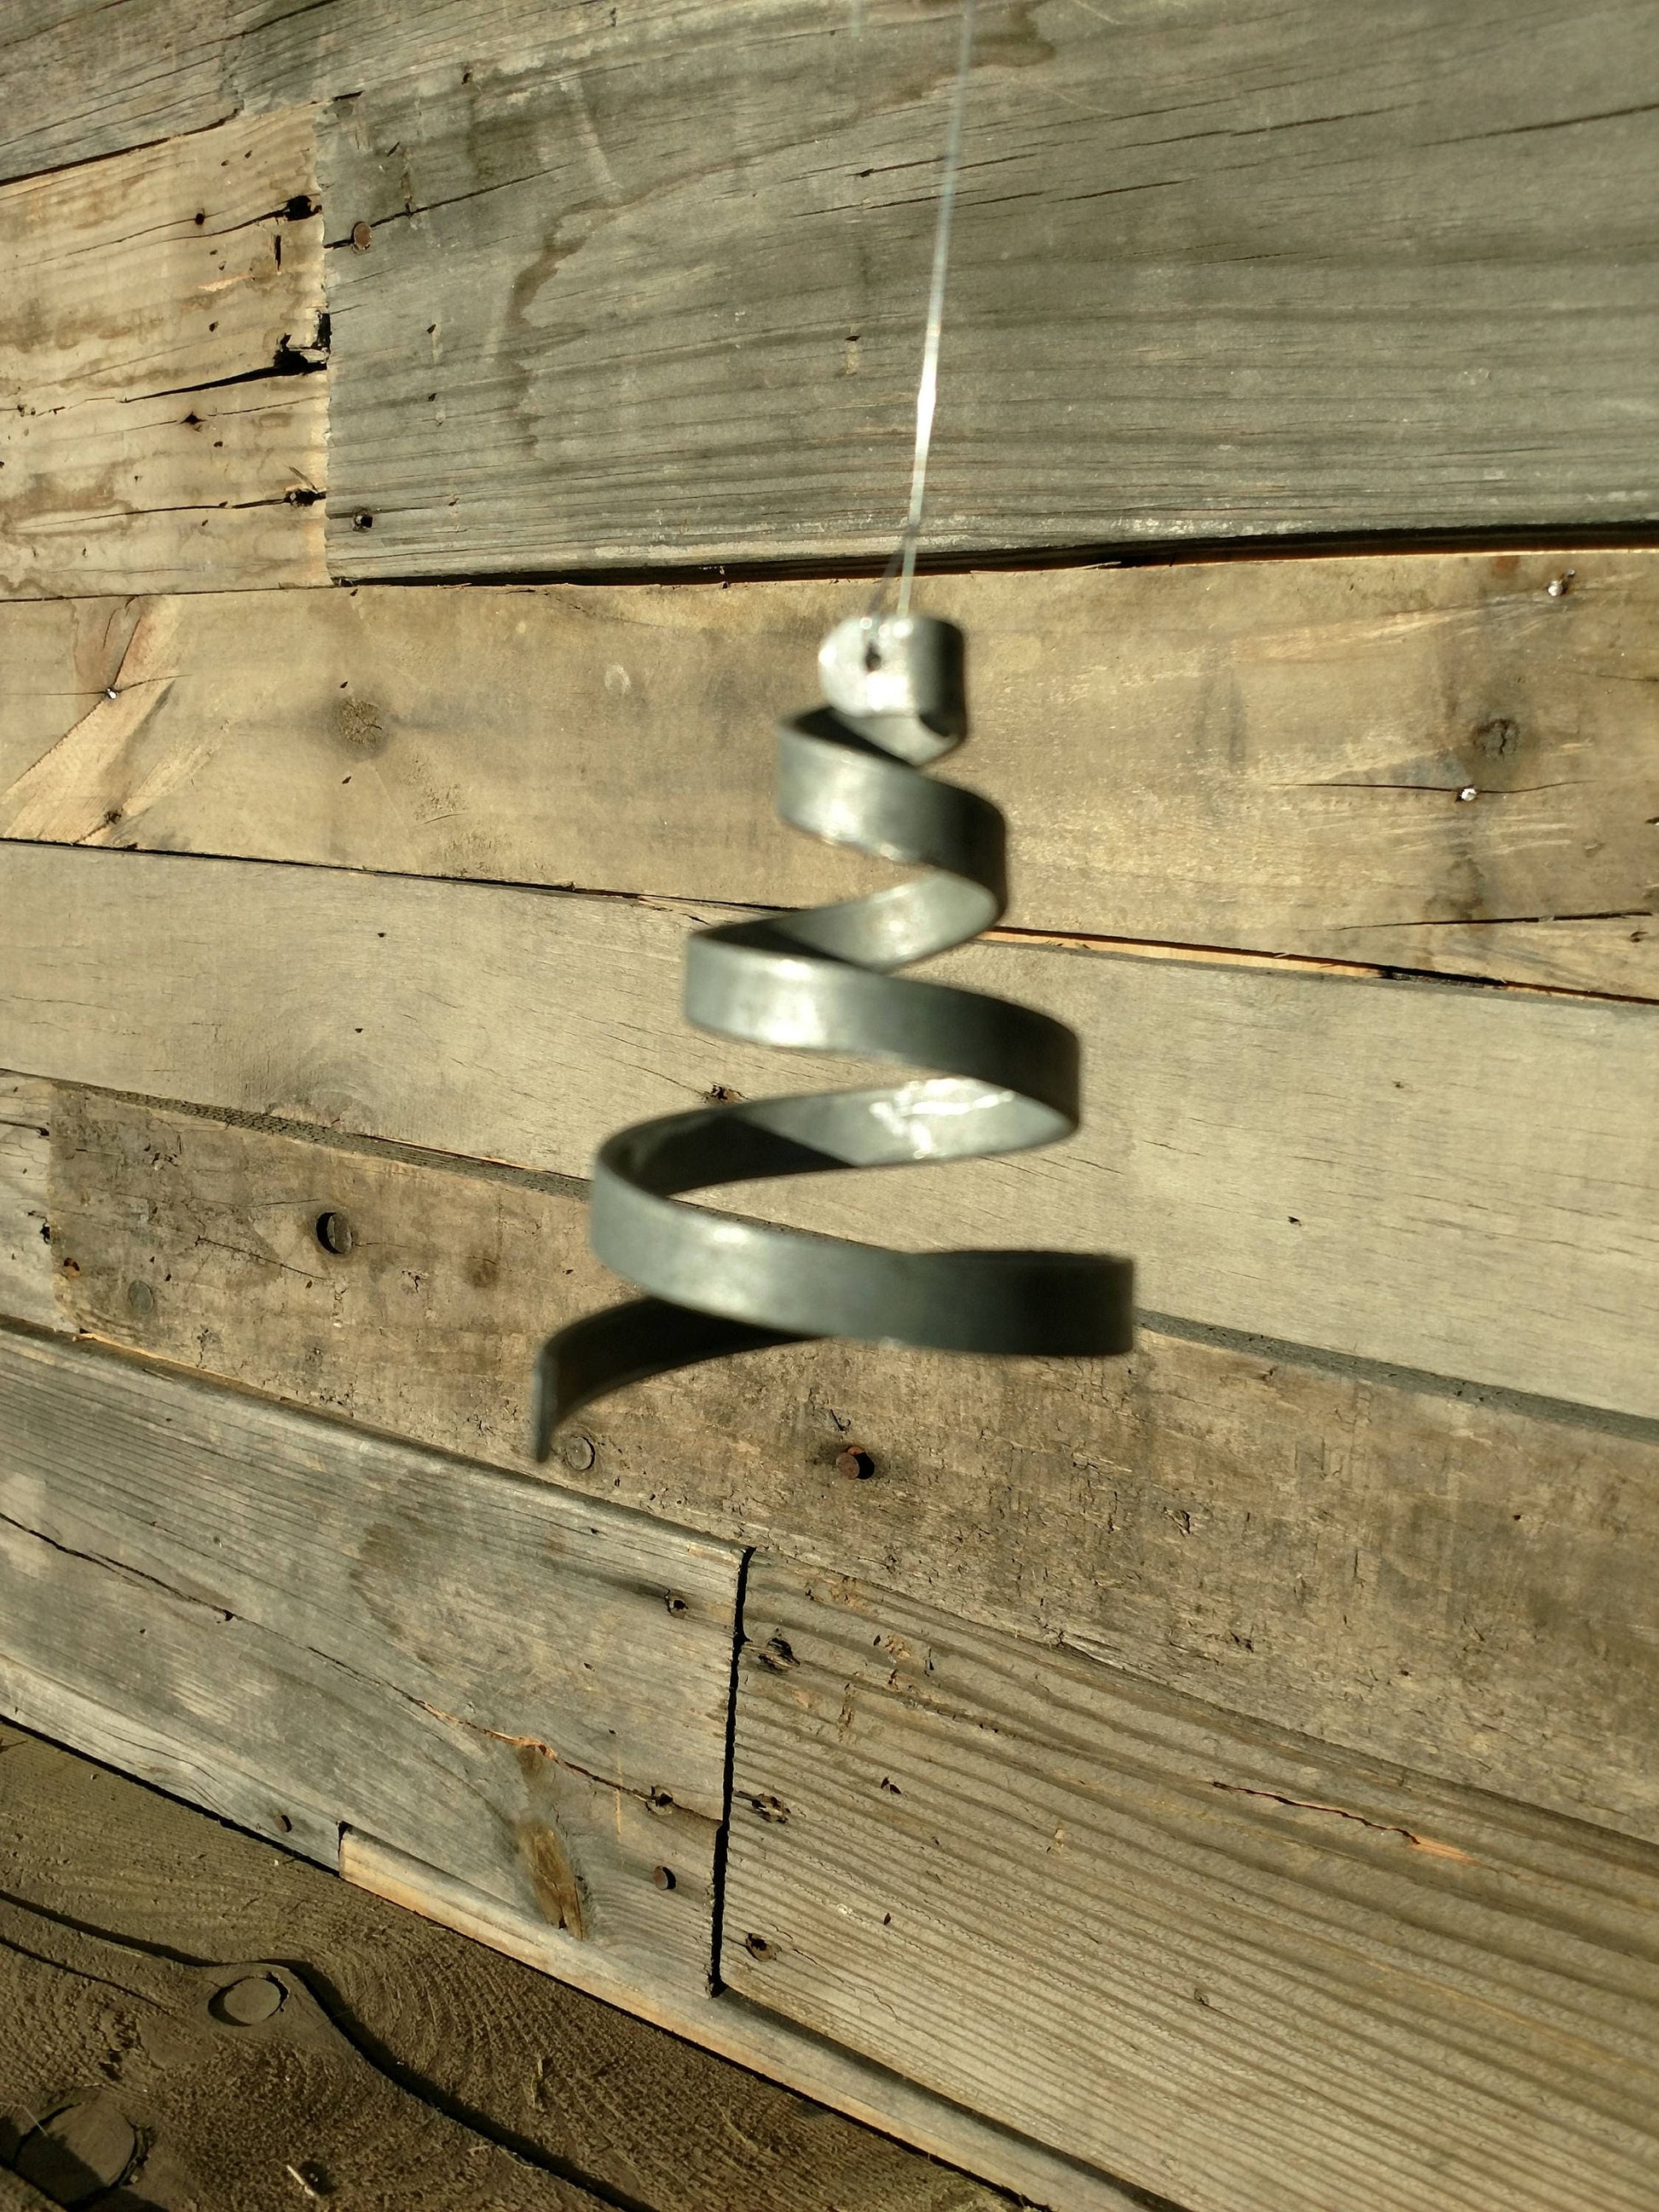 Wine Barrel Ring Ornament - Mimilo - Set of 3 made from retired Napa wine barrel rings. 100% Recycled!